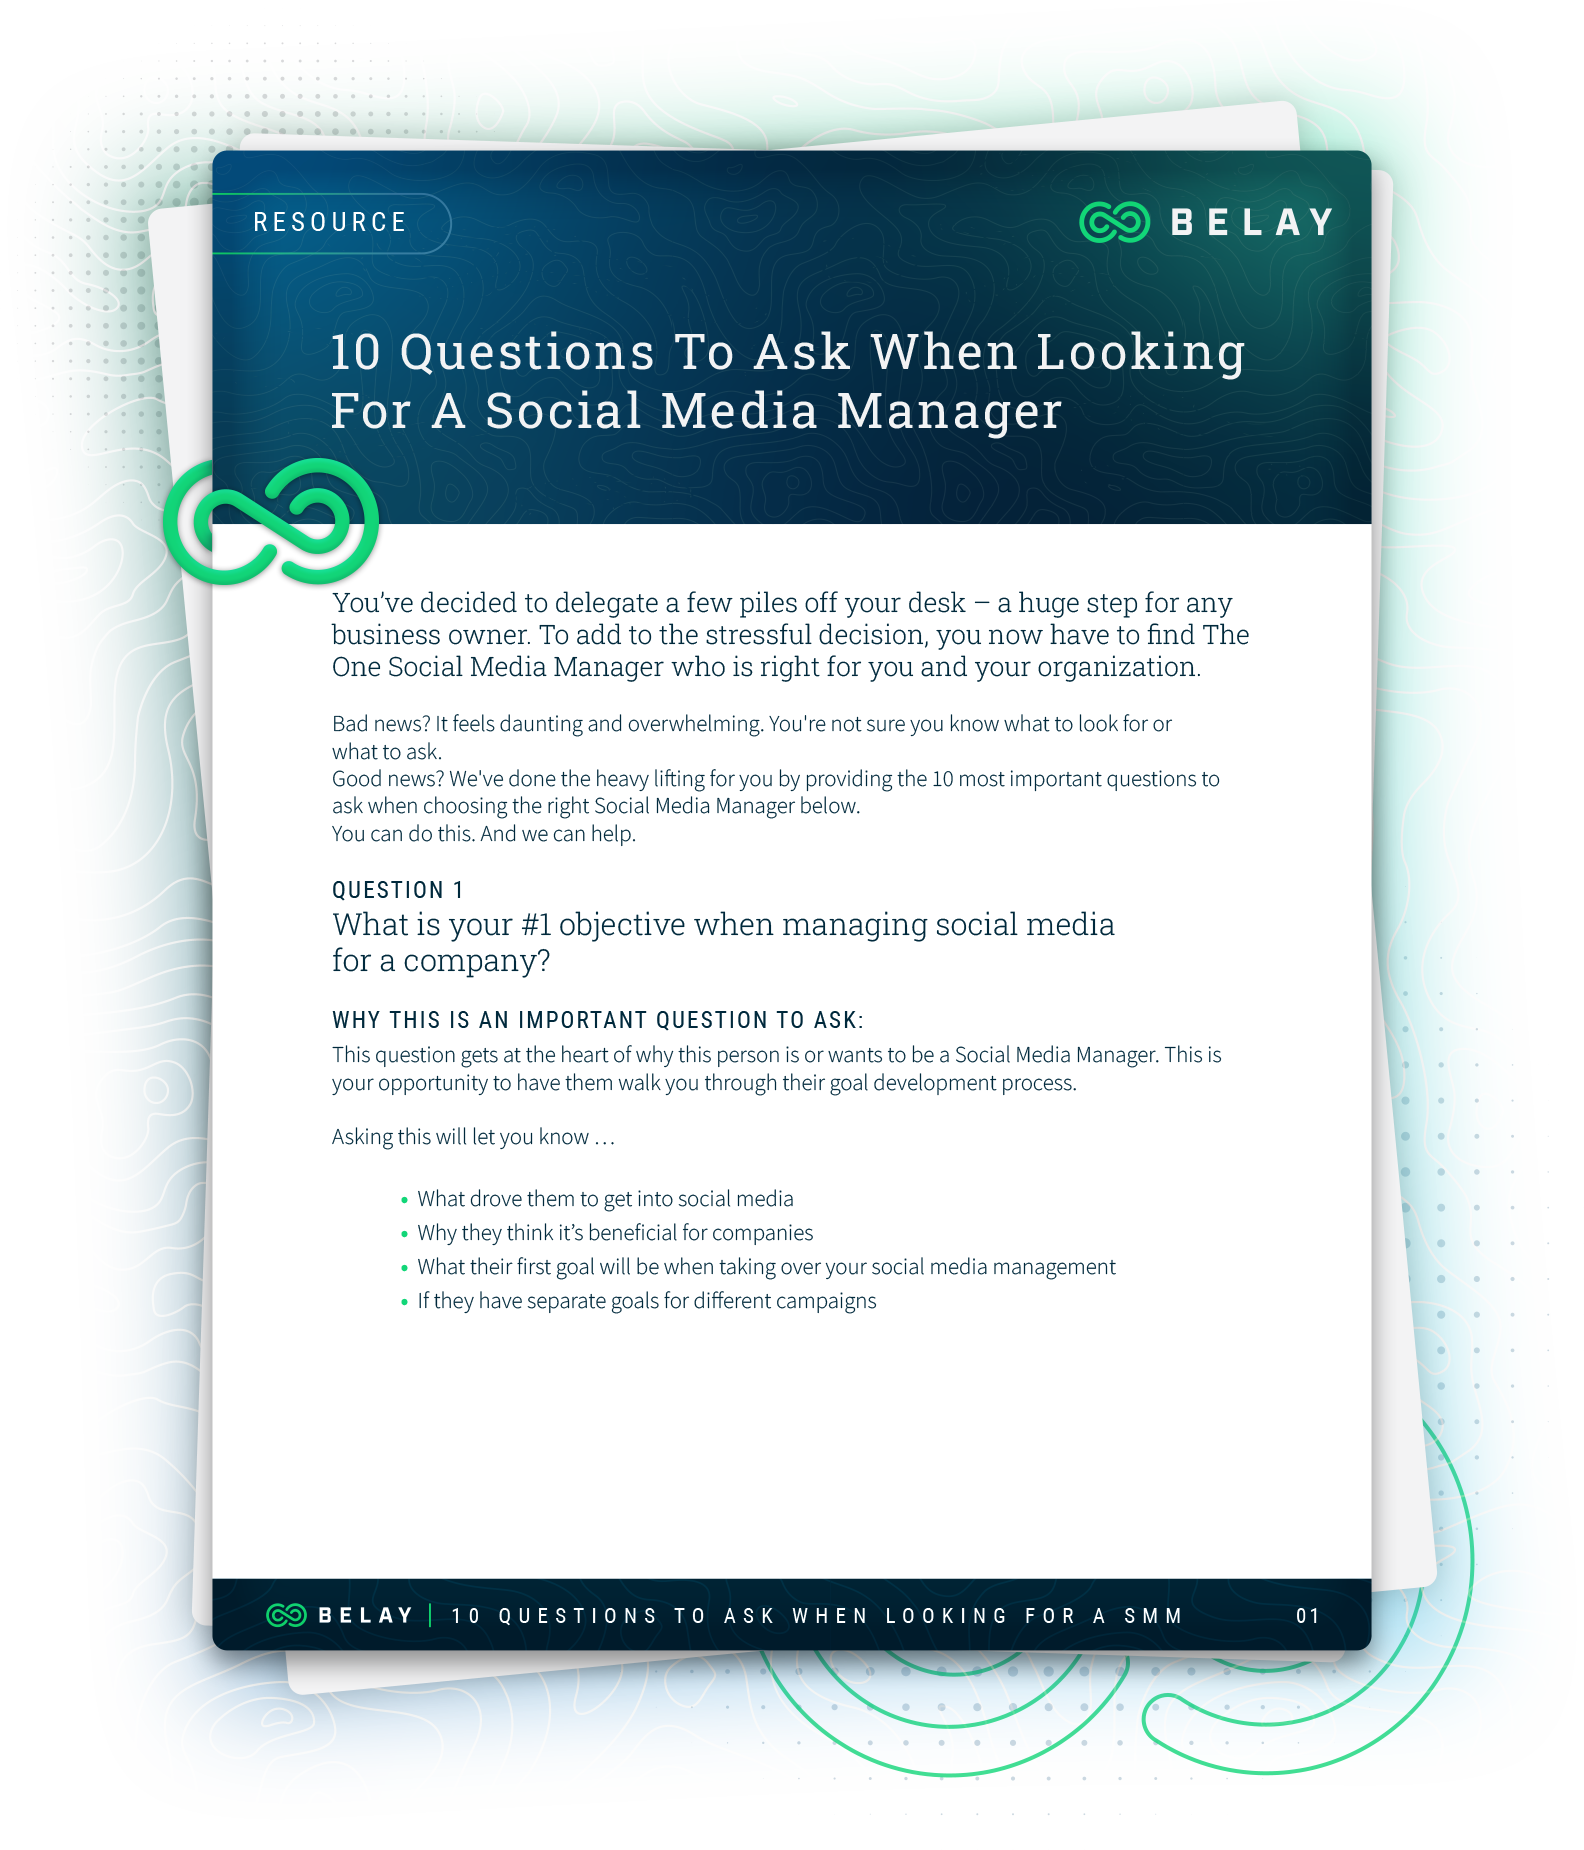 10 Questions to Ask When Looking For A Social Media Manager